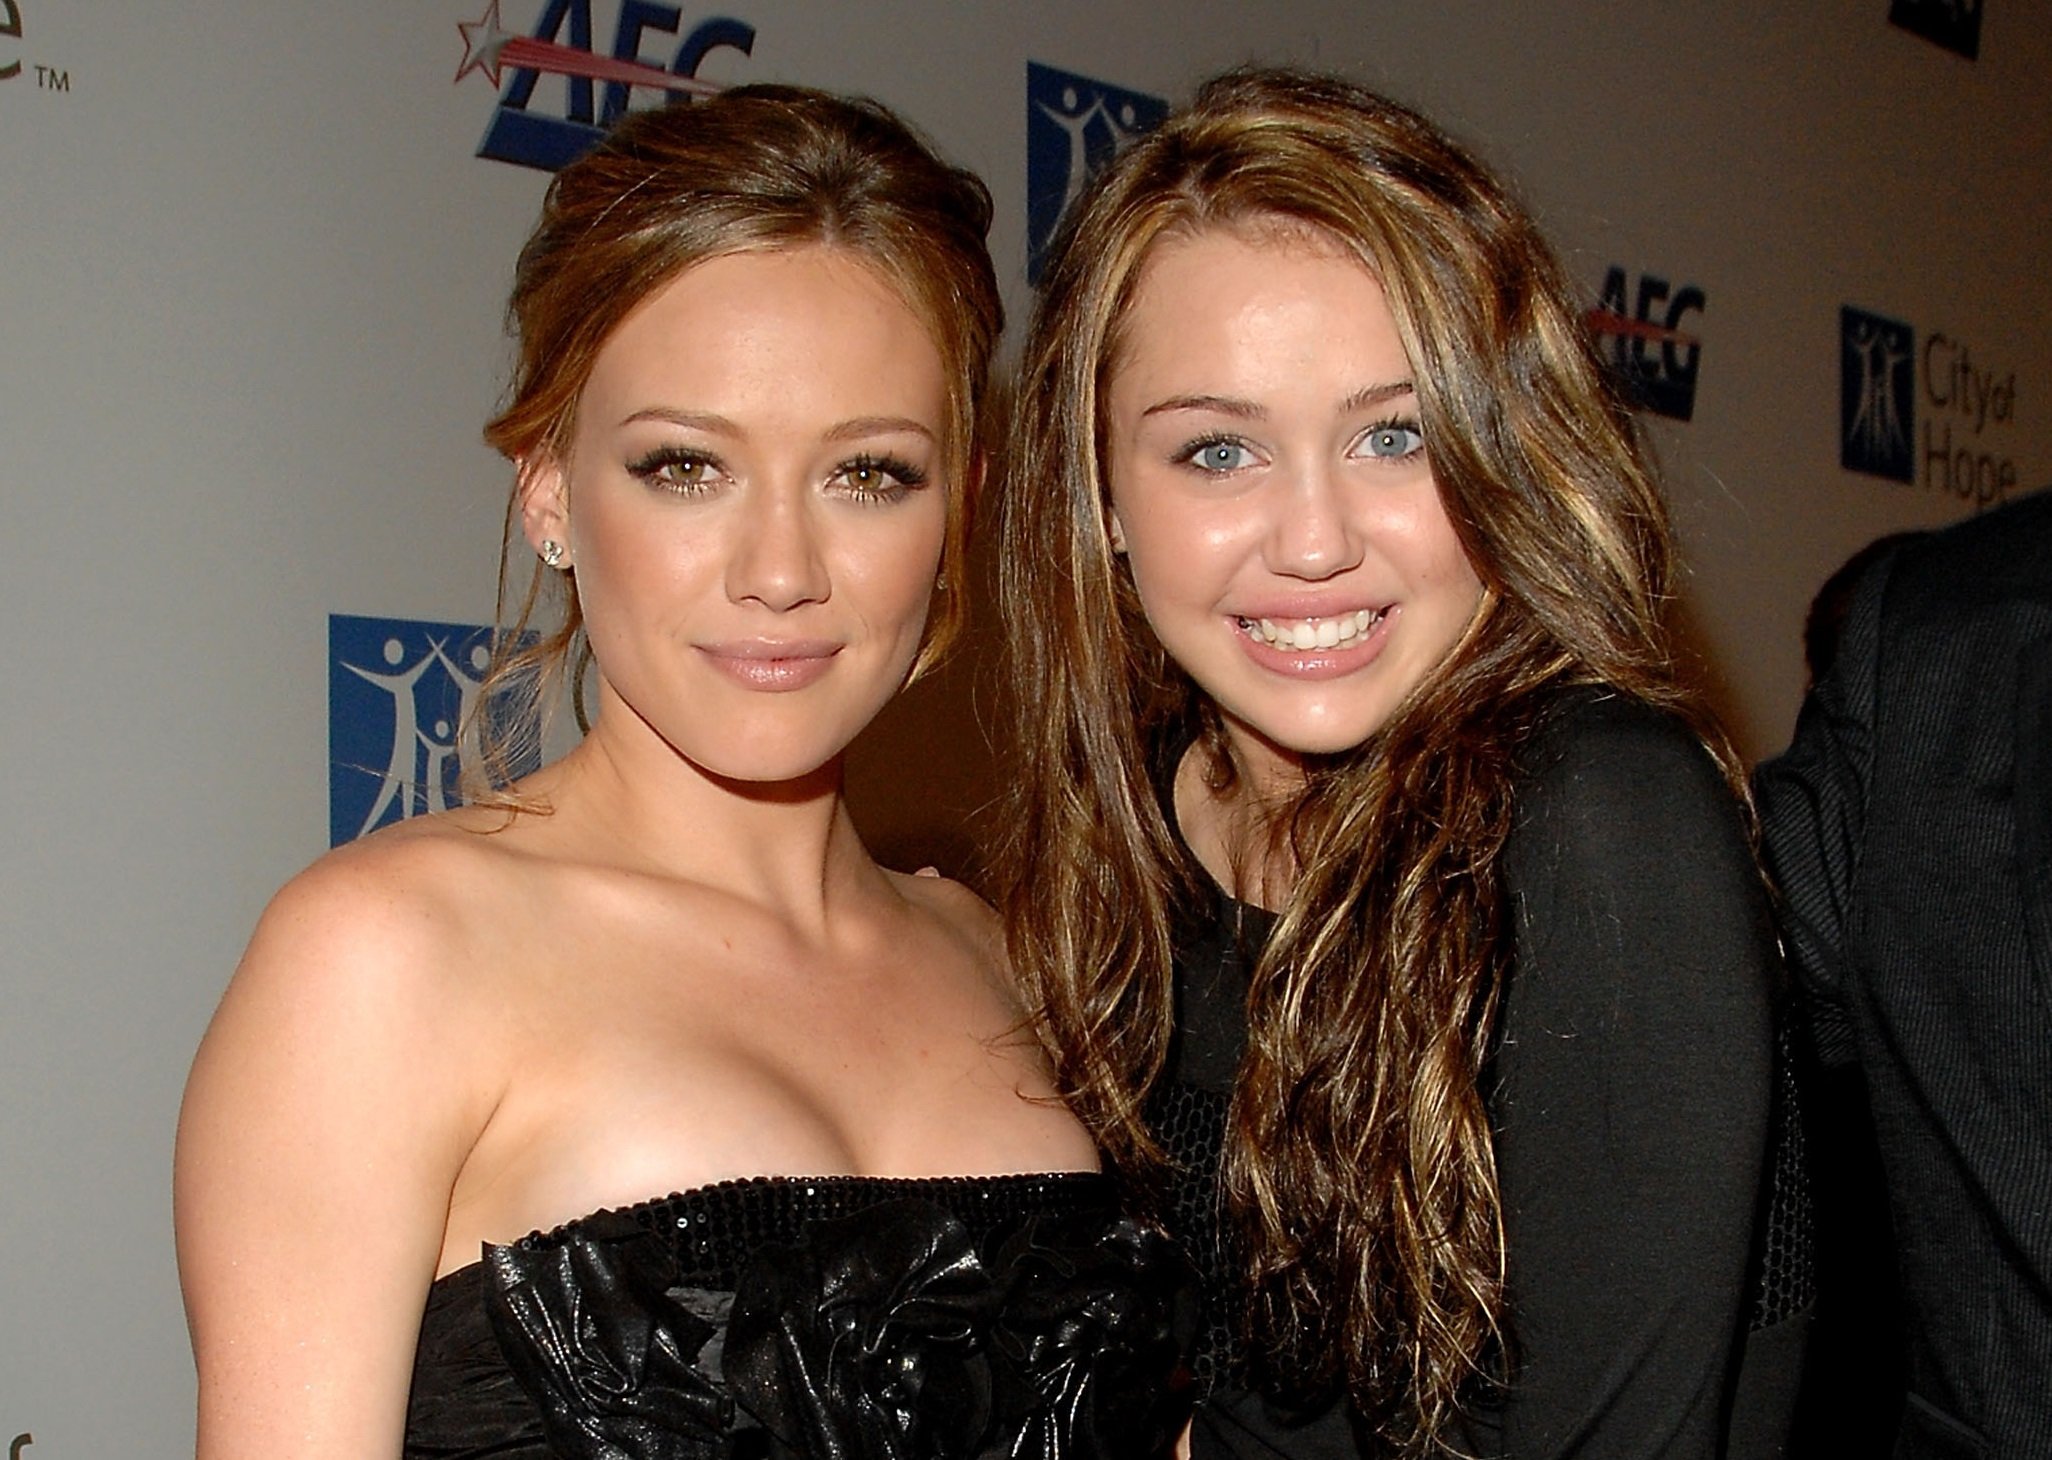 Hilary Duff Says Miley Cyrus ‘Kind of Embarrasses Me,’ But Calls Her ‘the Epitome of Cool’